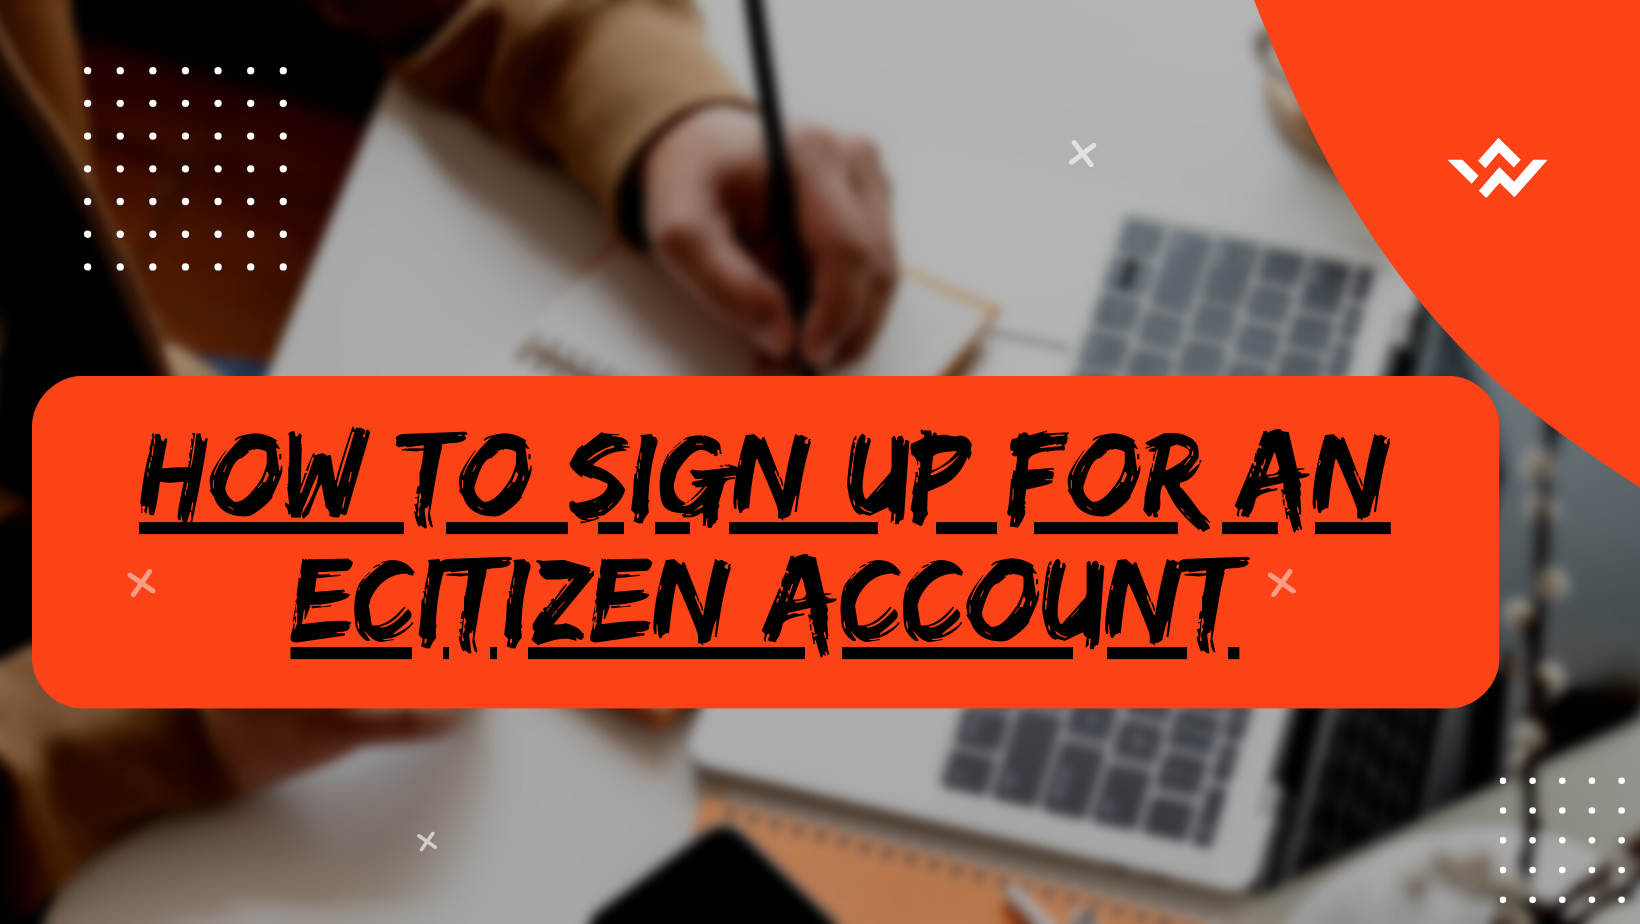 How to Sign Up for an eCitizen Account